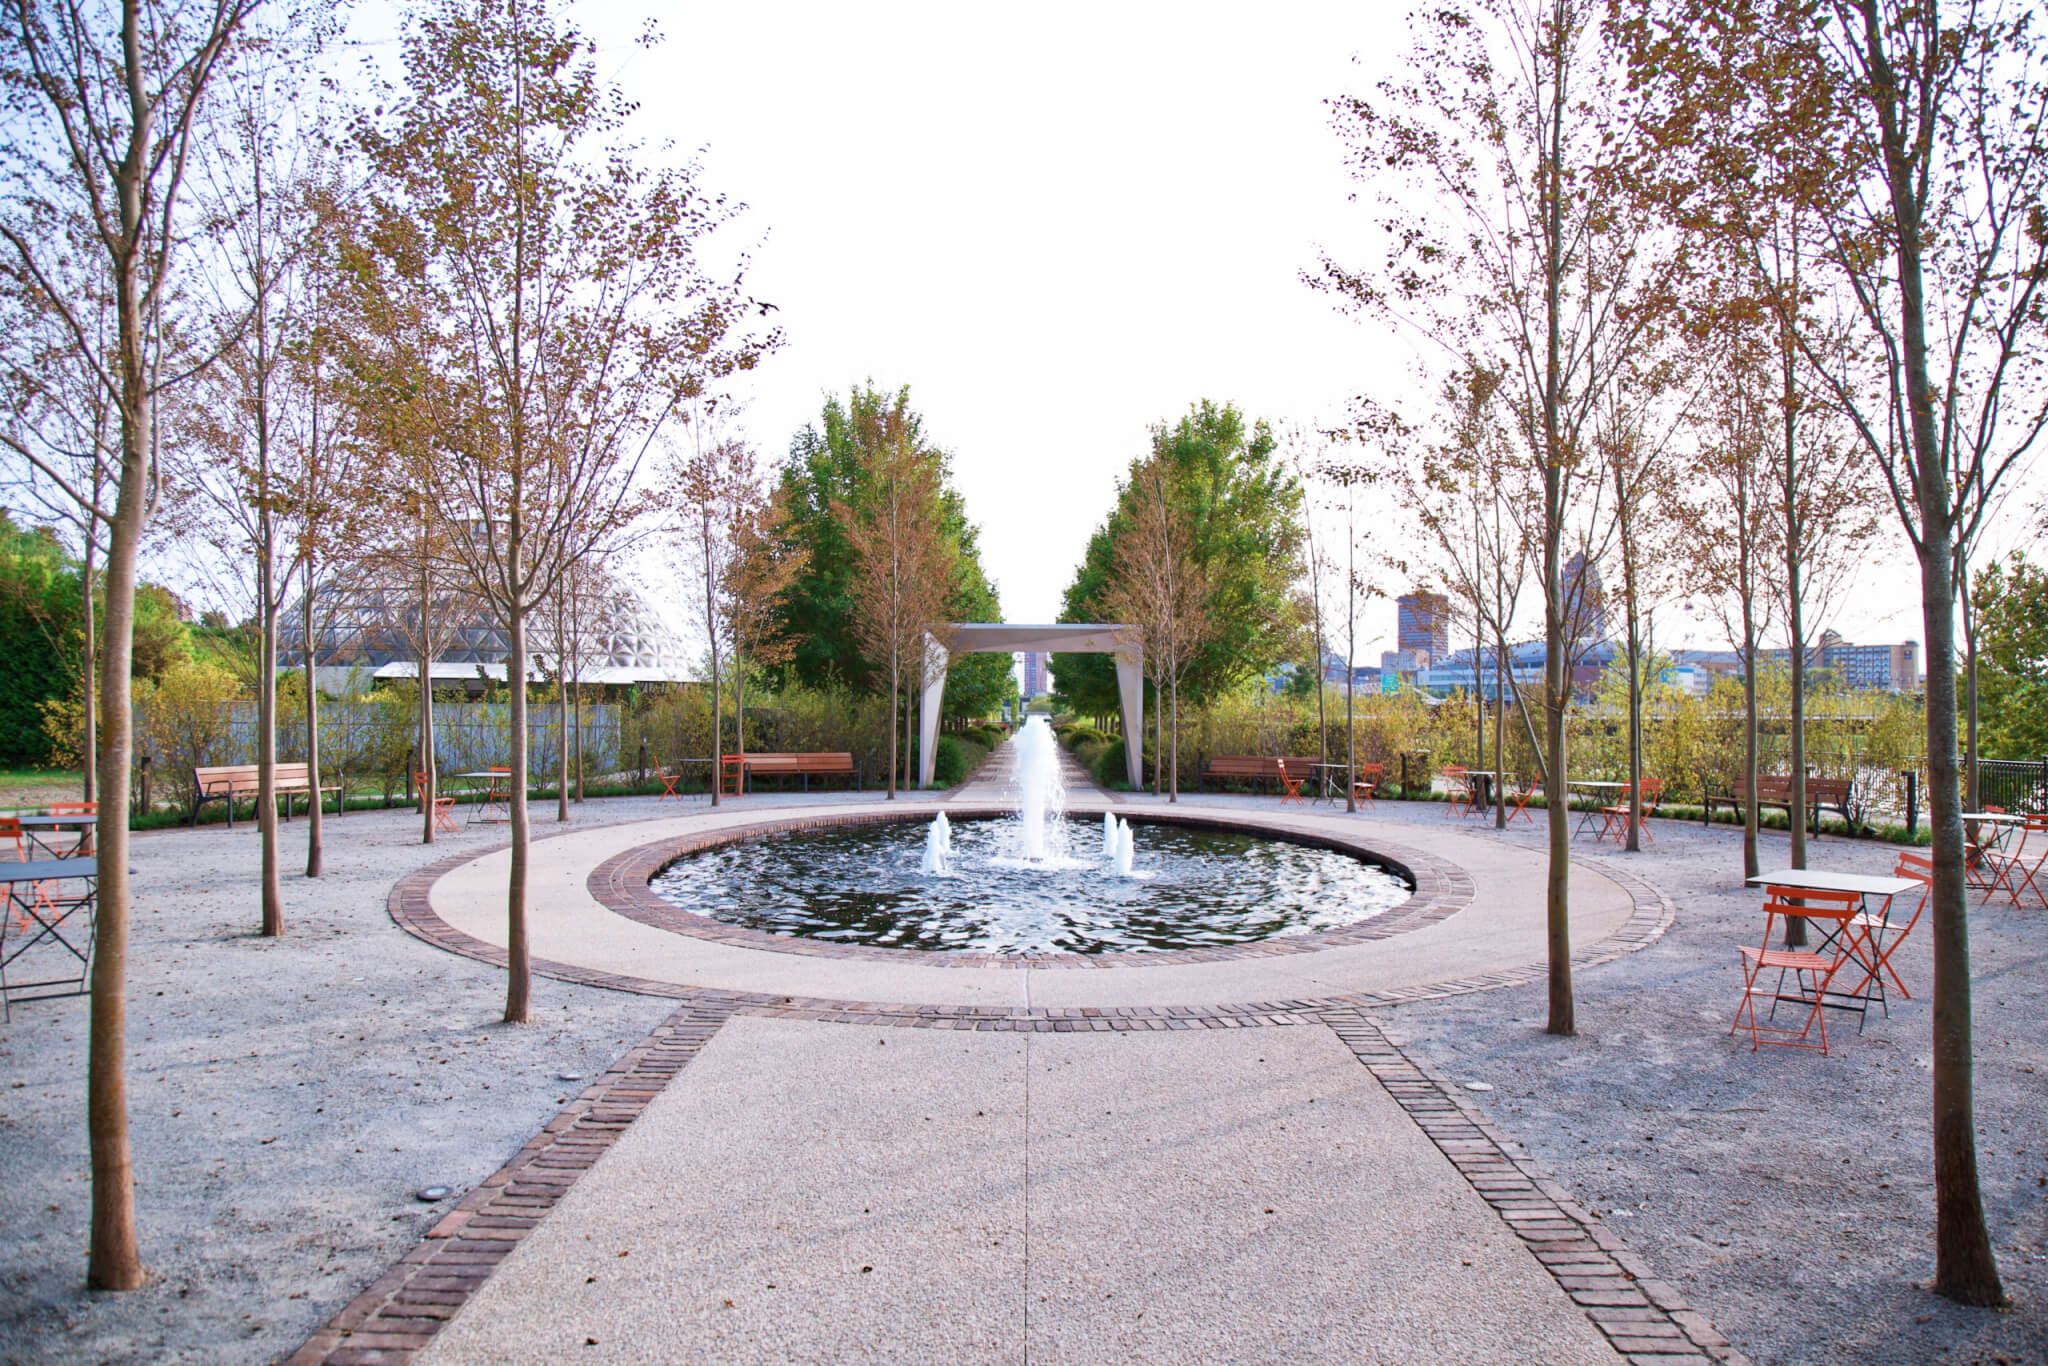 An extension from the Ruan Allée, the Ruan Reflection Garden welcomes guests with a fountain and reflection pool in the center of the ellipse-shaped space.